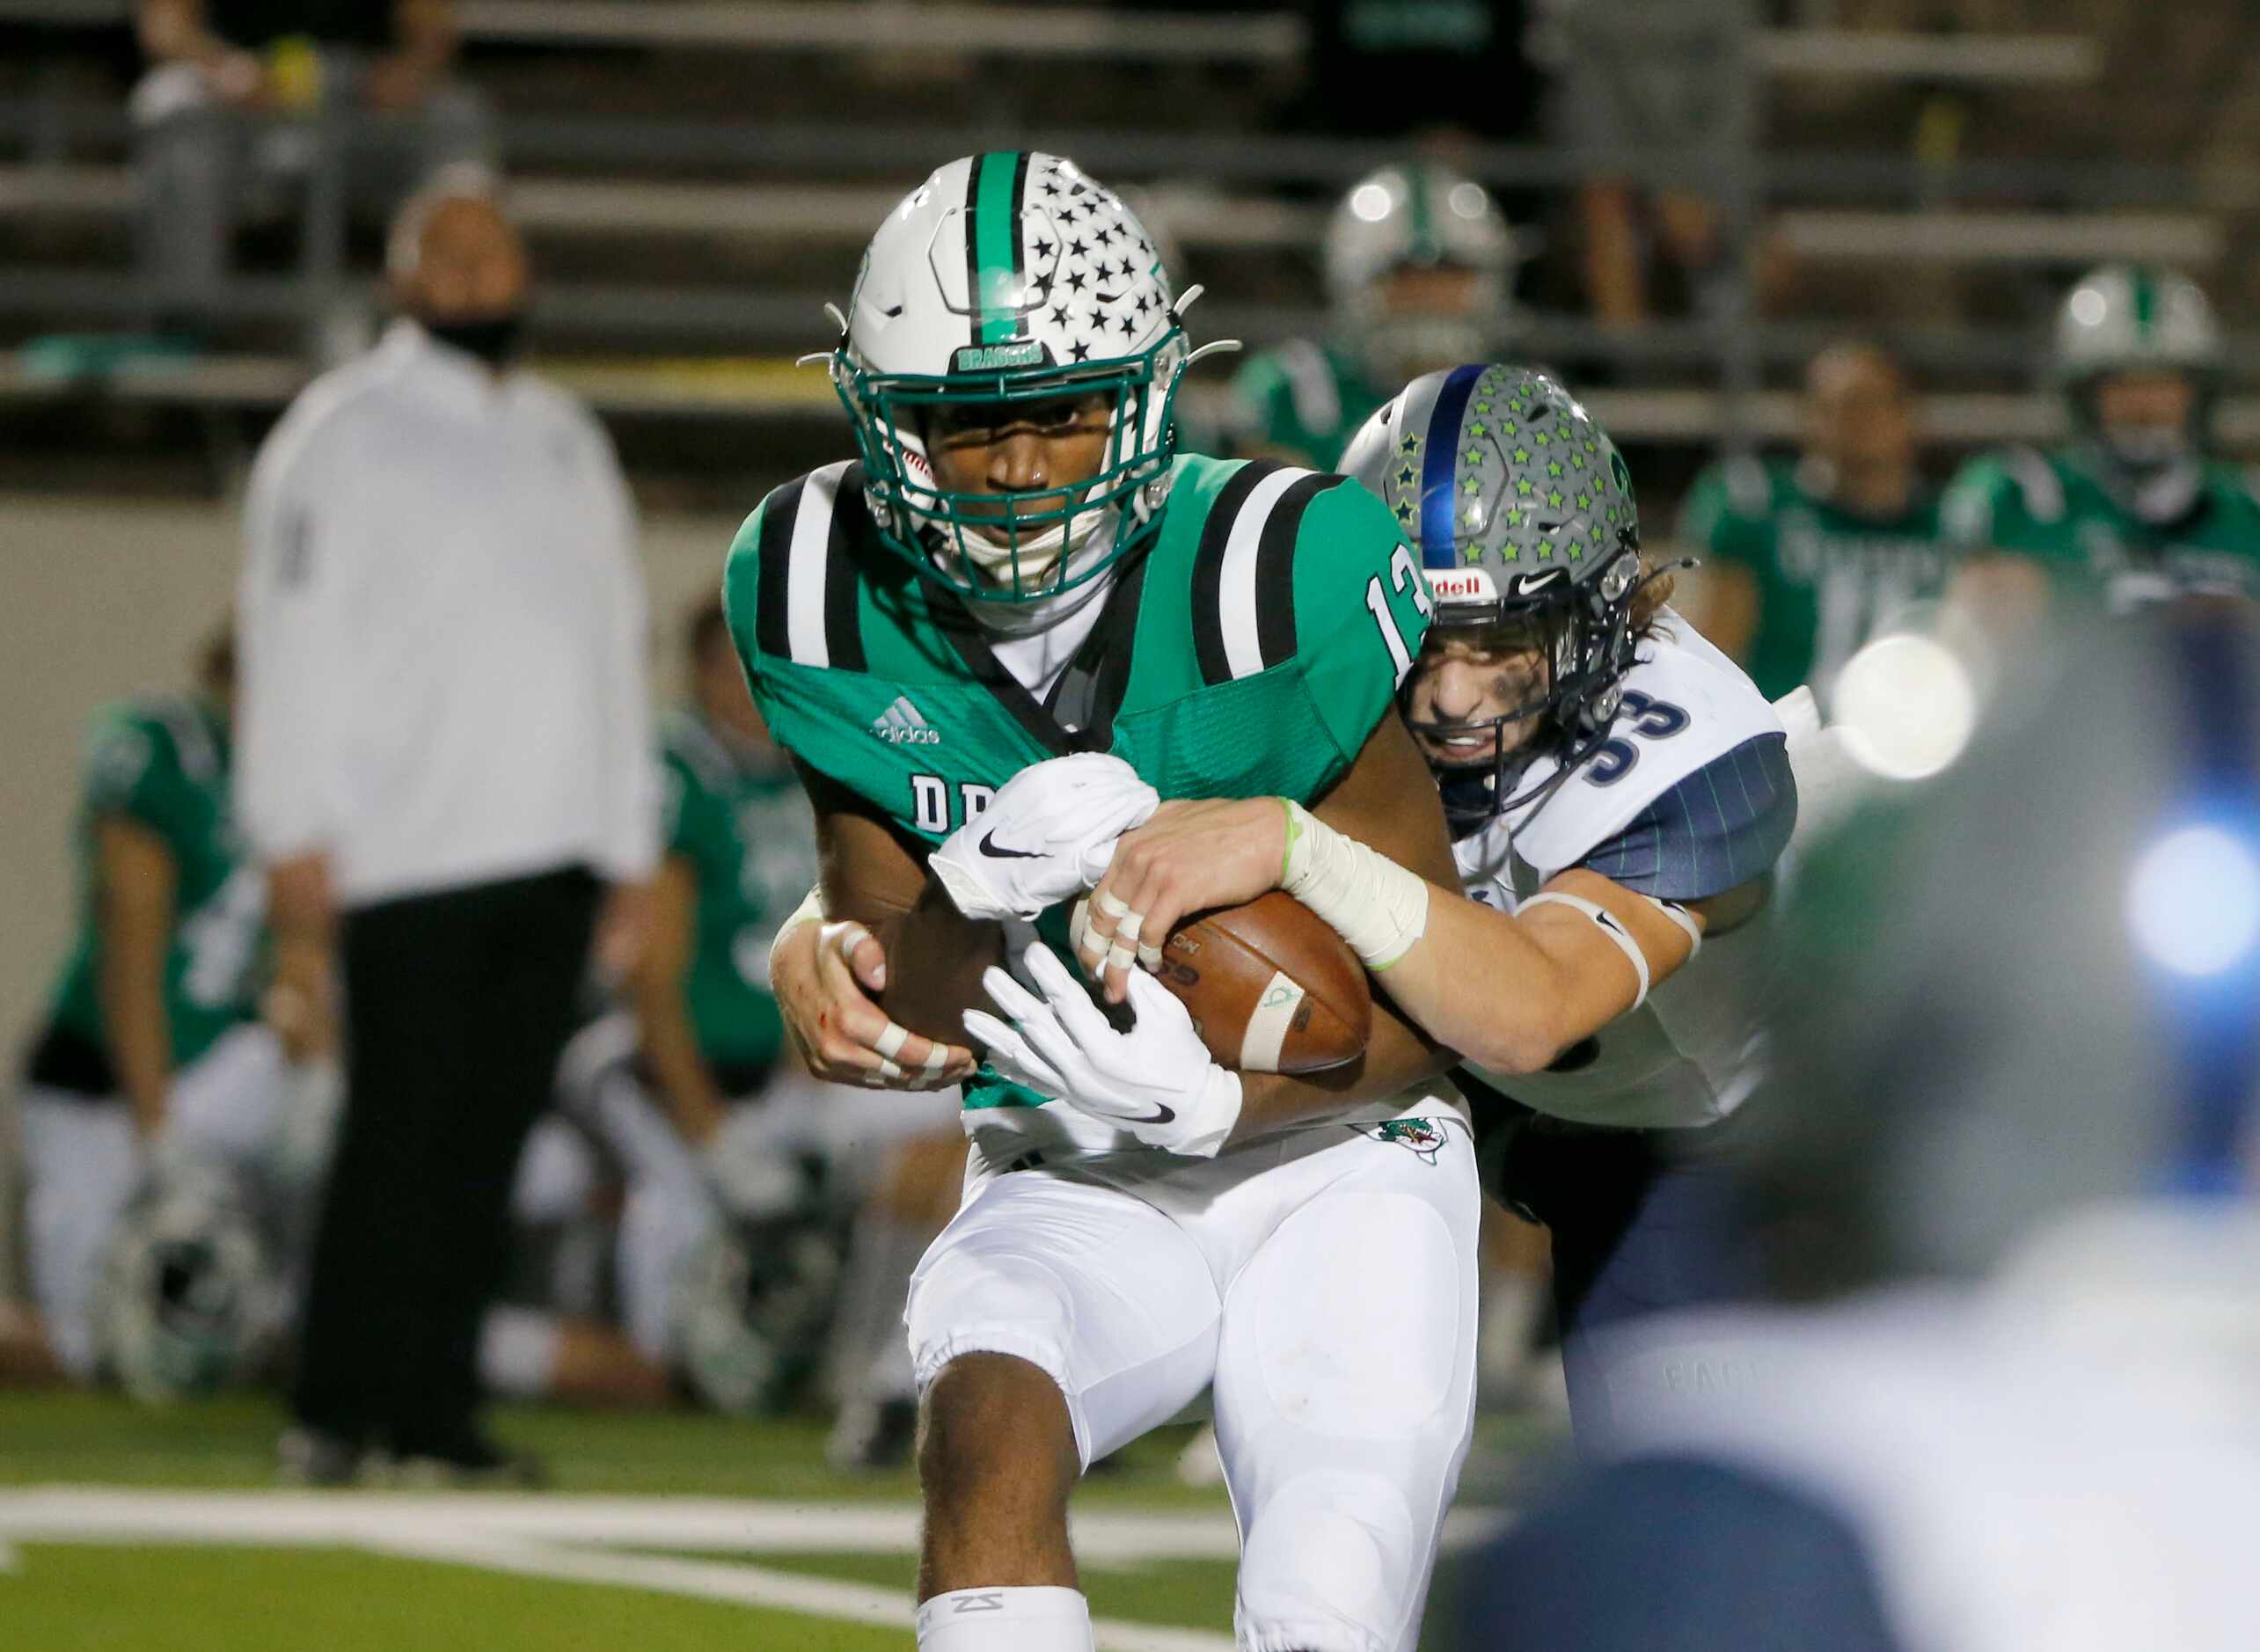 Southlake receiver R.J. Maryland (13) makes a reception and is hit by Eaton safety Ben...